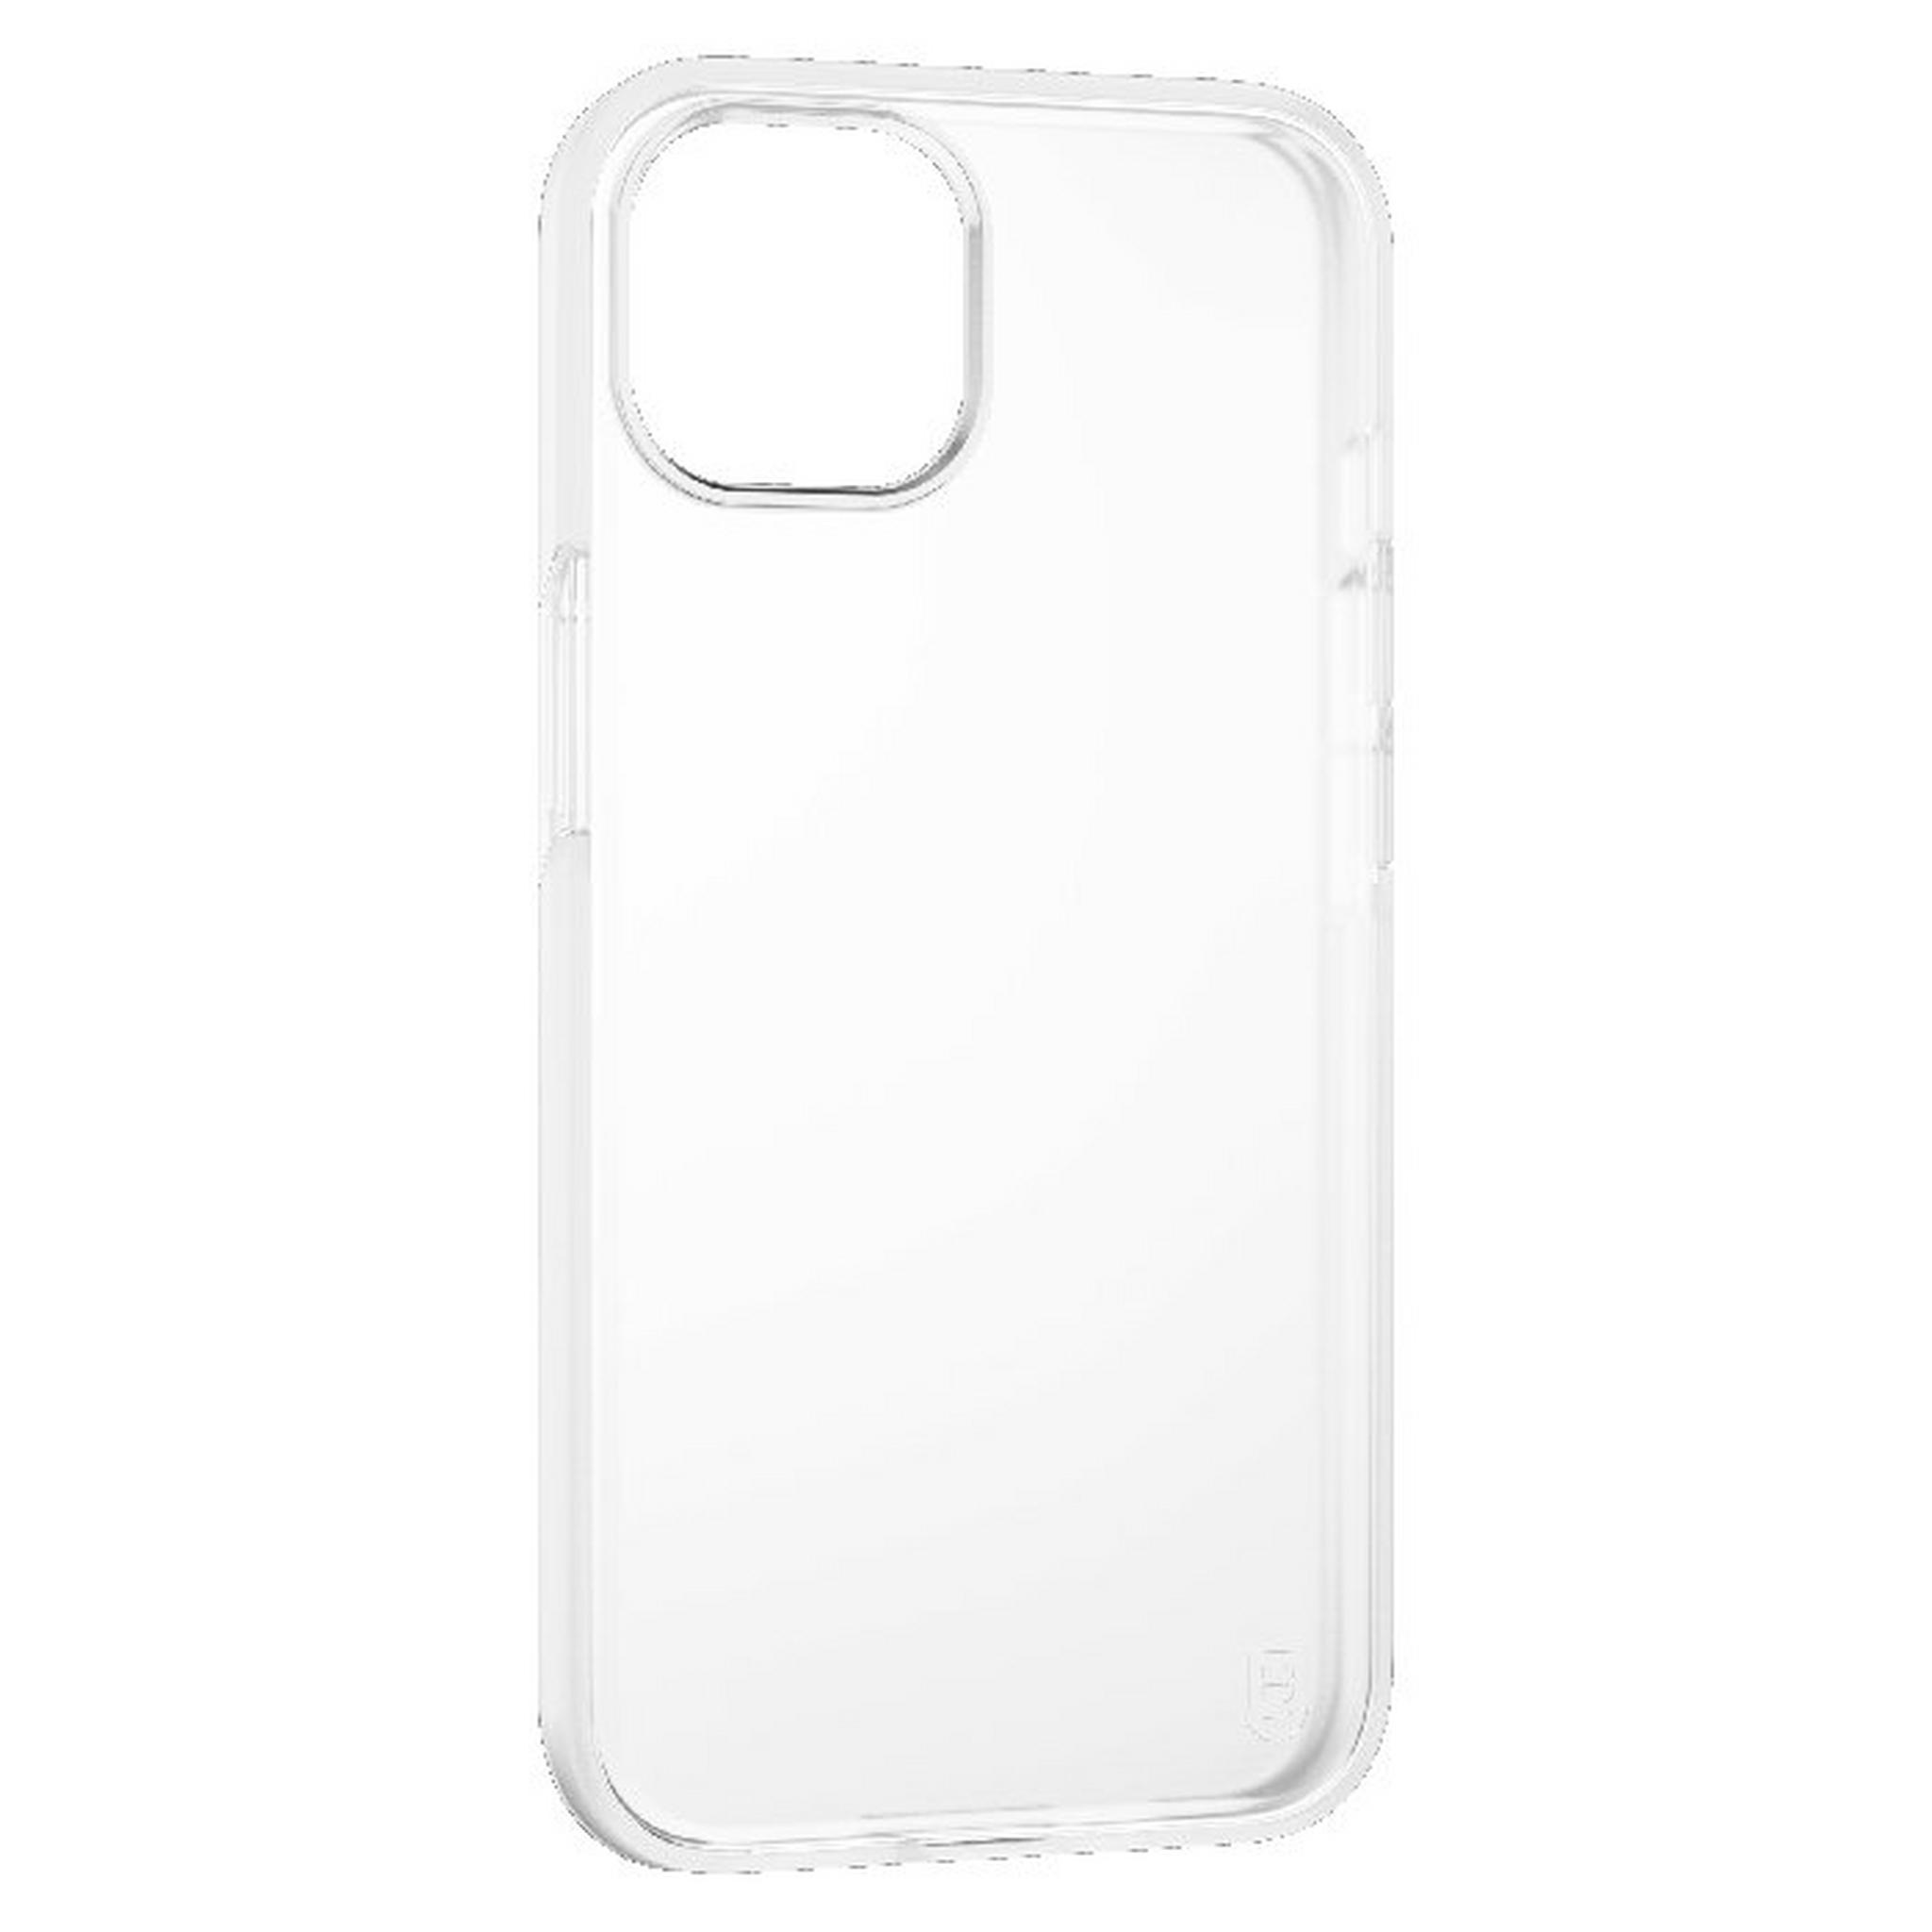 Bodyguardz Bundle for iPhone 13 Pro Max Cover + Screen Protector -  Clear